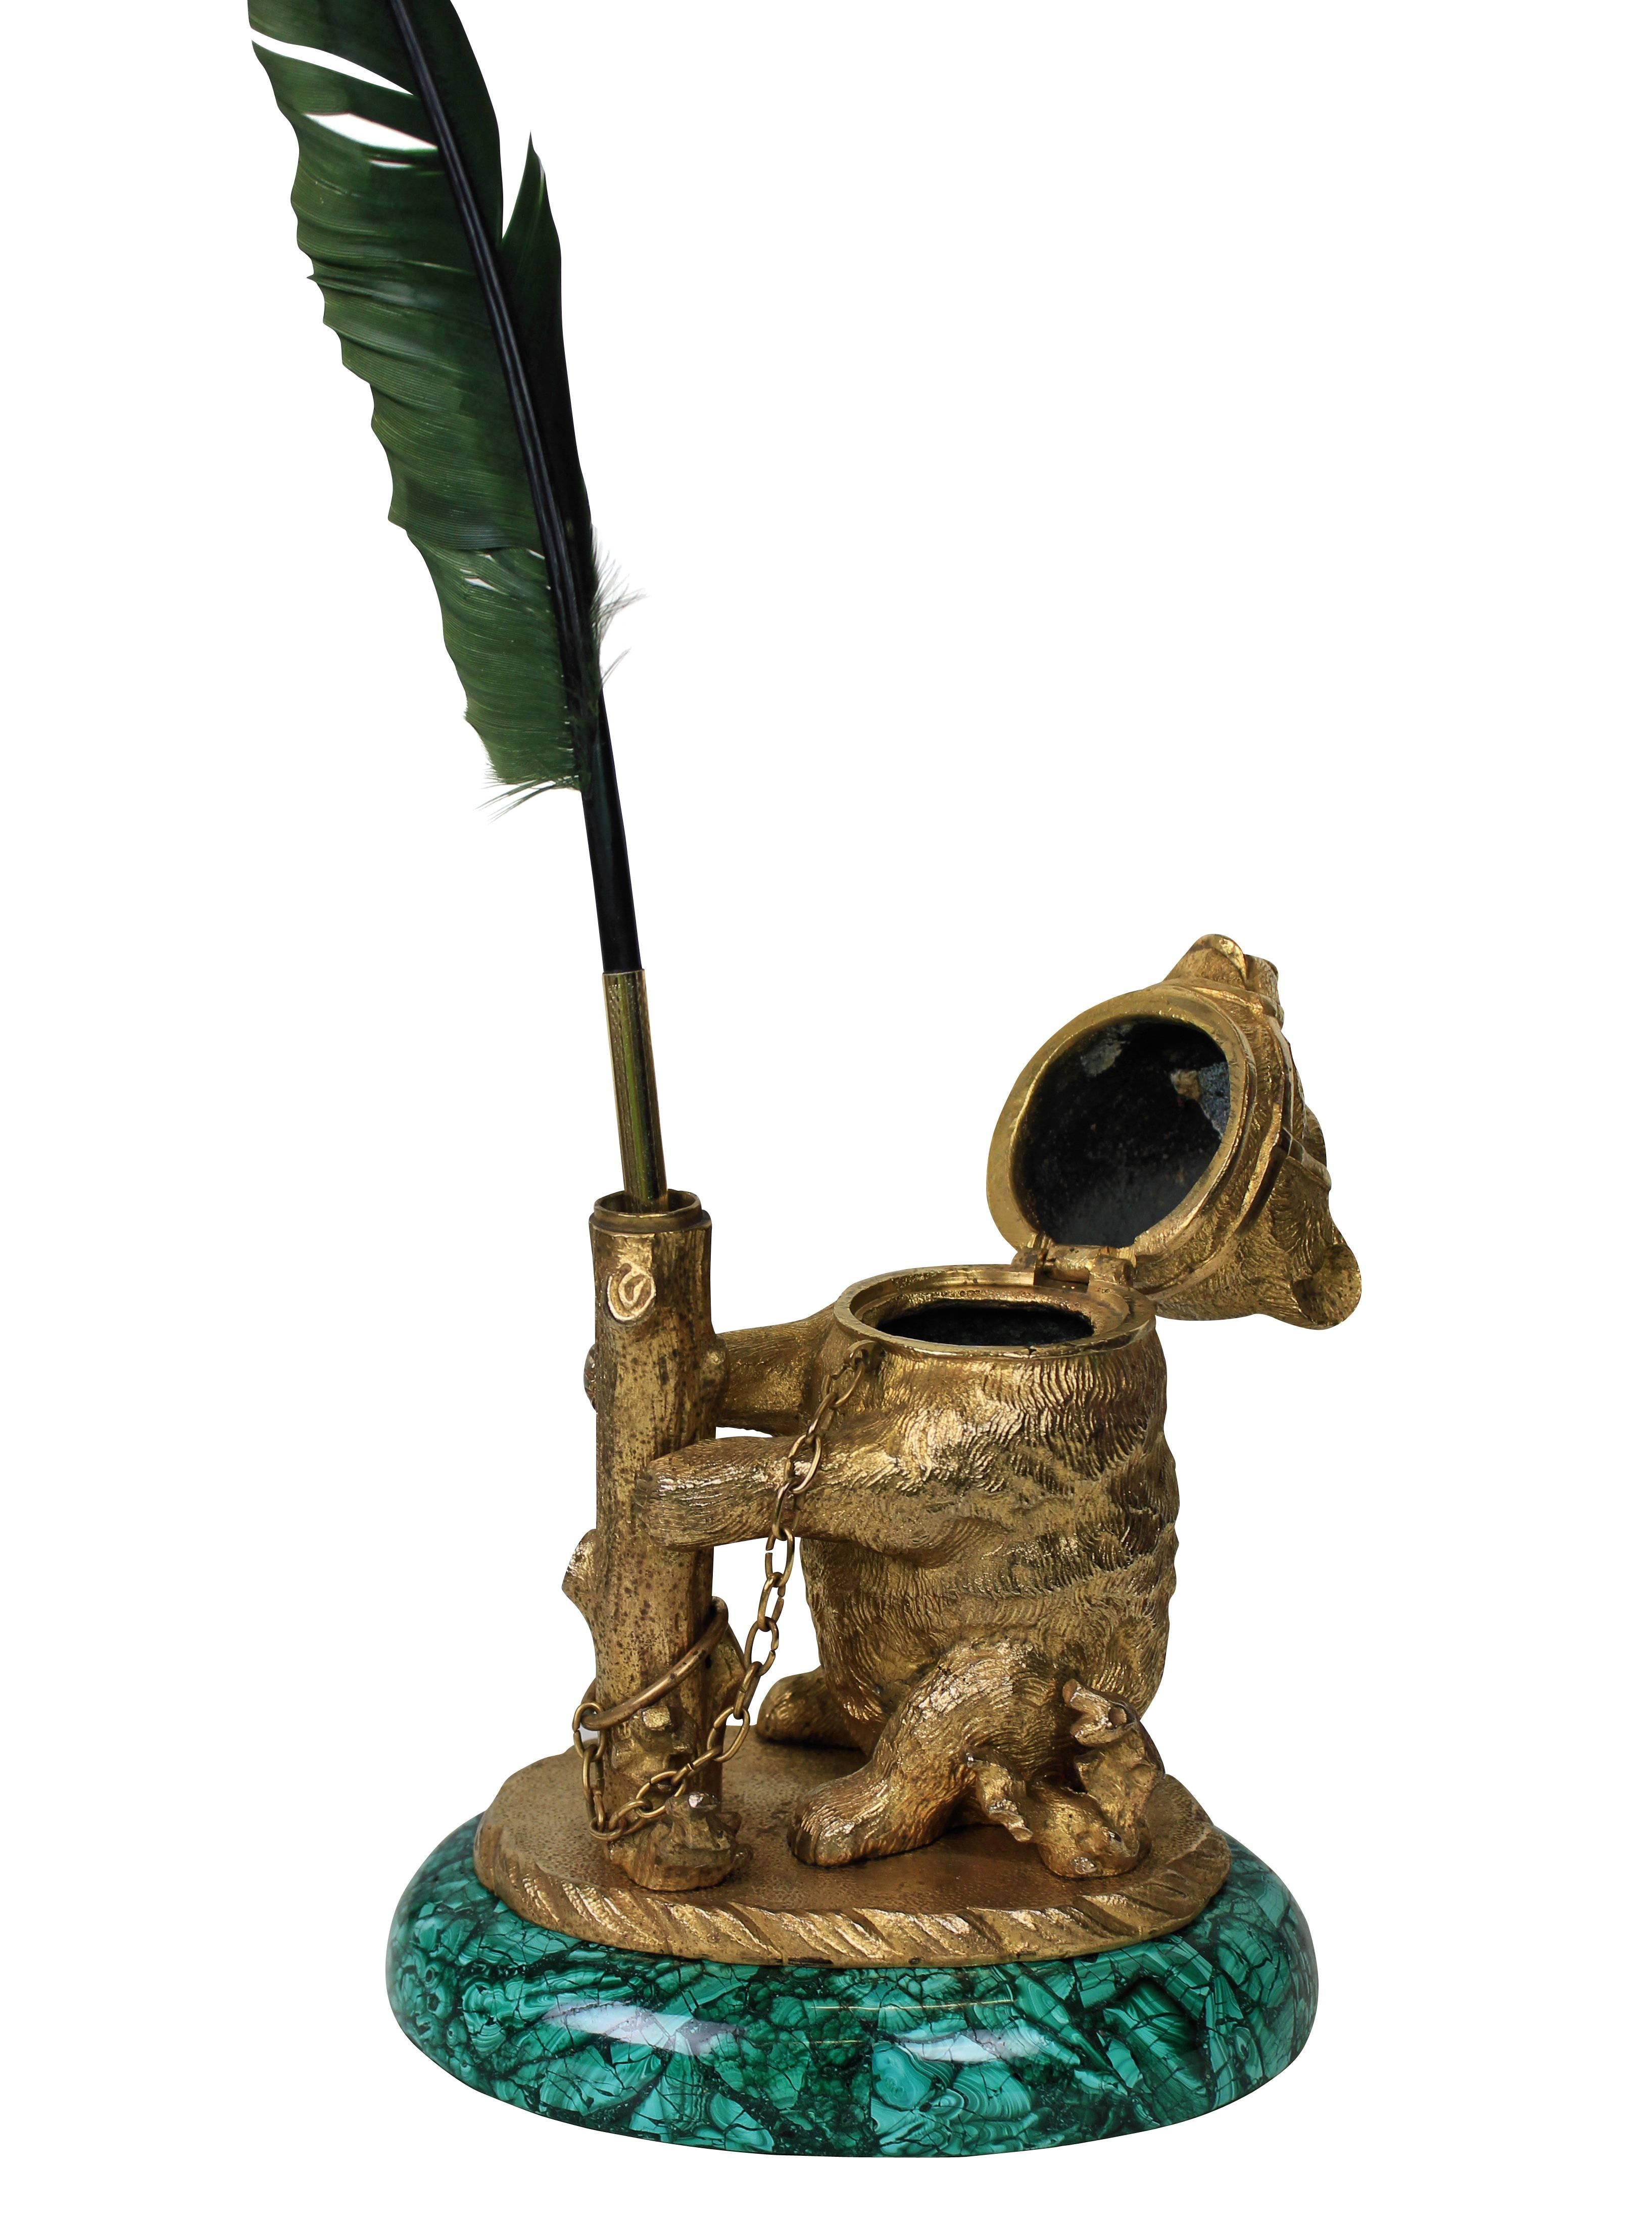 A fine Russian encrier (ink pot) in the form of a bear in ormolu, with ruby eyes and on a malachite base.